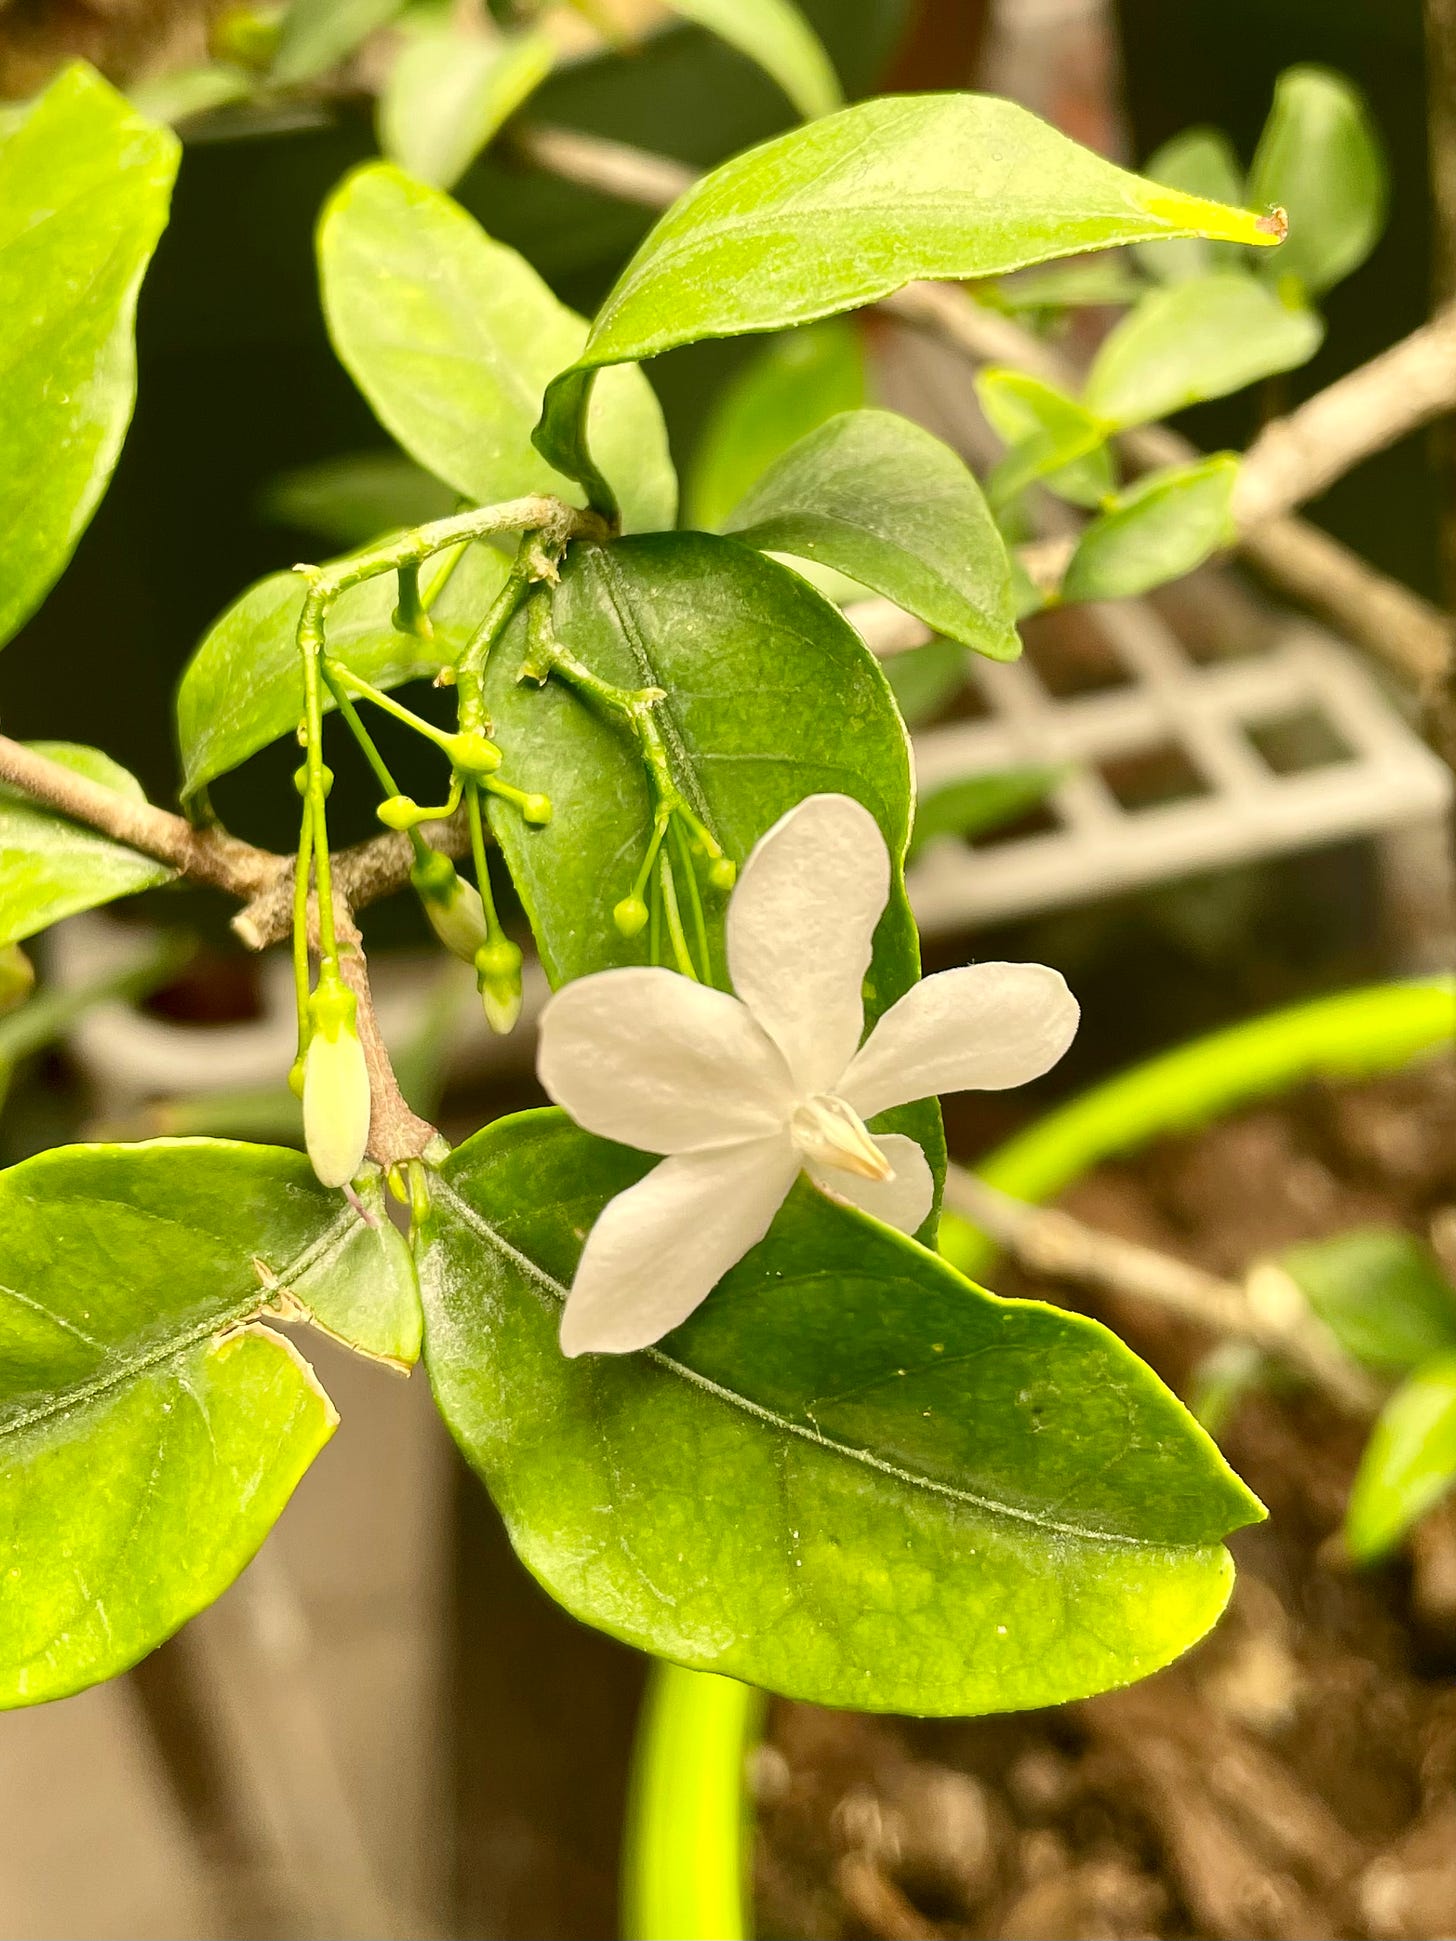 ID: Close up photo of white, five-petaled water jasmine flower growing from a pruned branch.